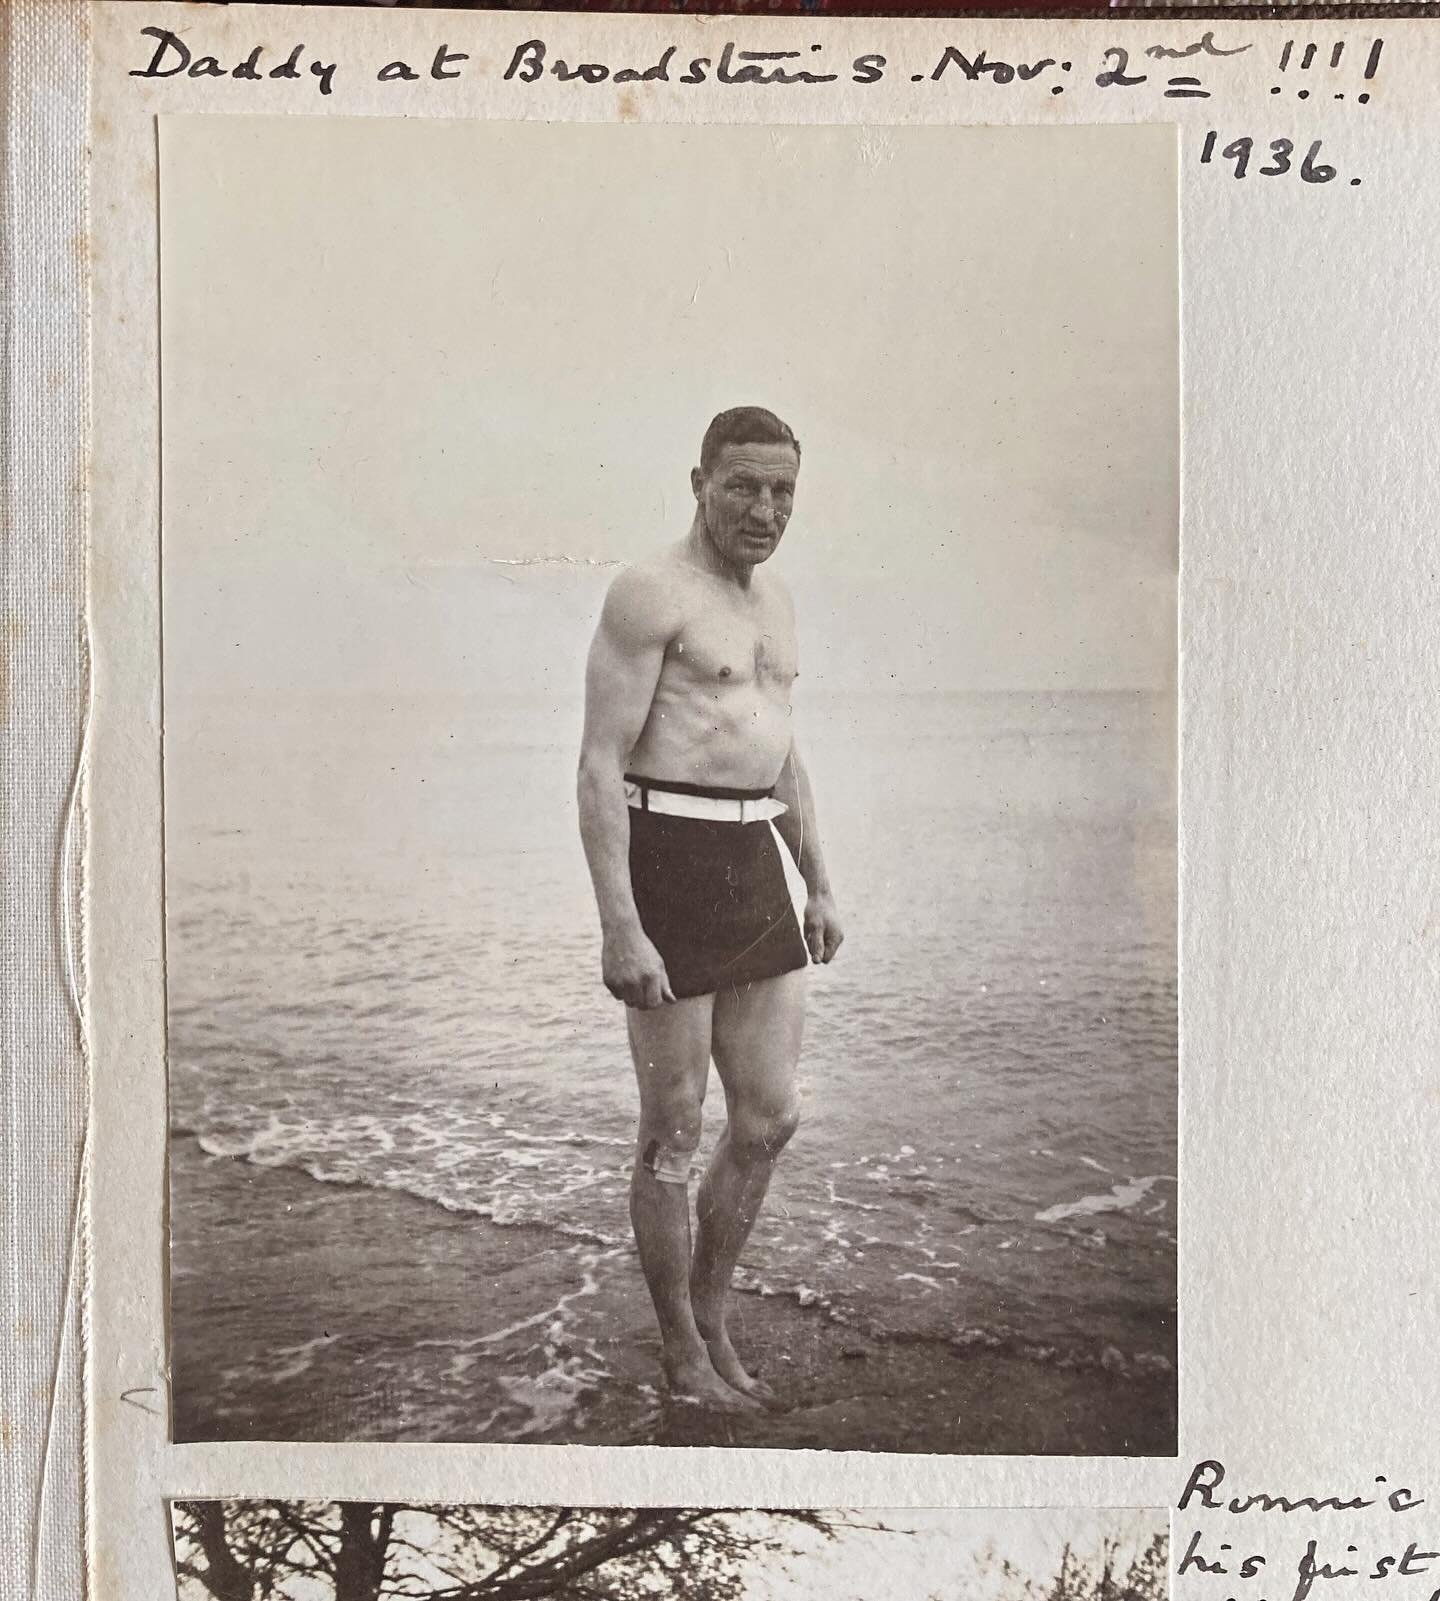 We spent a fabulous weekend with my cousin @elizabethhaldaneart in Scotland. Much time spent trawling through my grandmother&rsquo;s detailed photo albums. I found this photo of my England rugby-playing grandfather taking a dip in November 1932.  Now